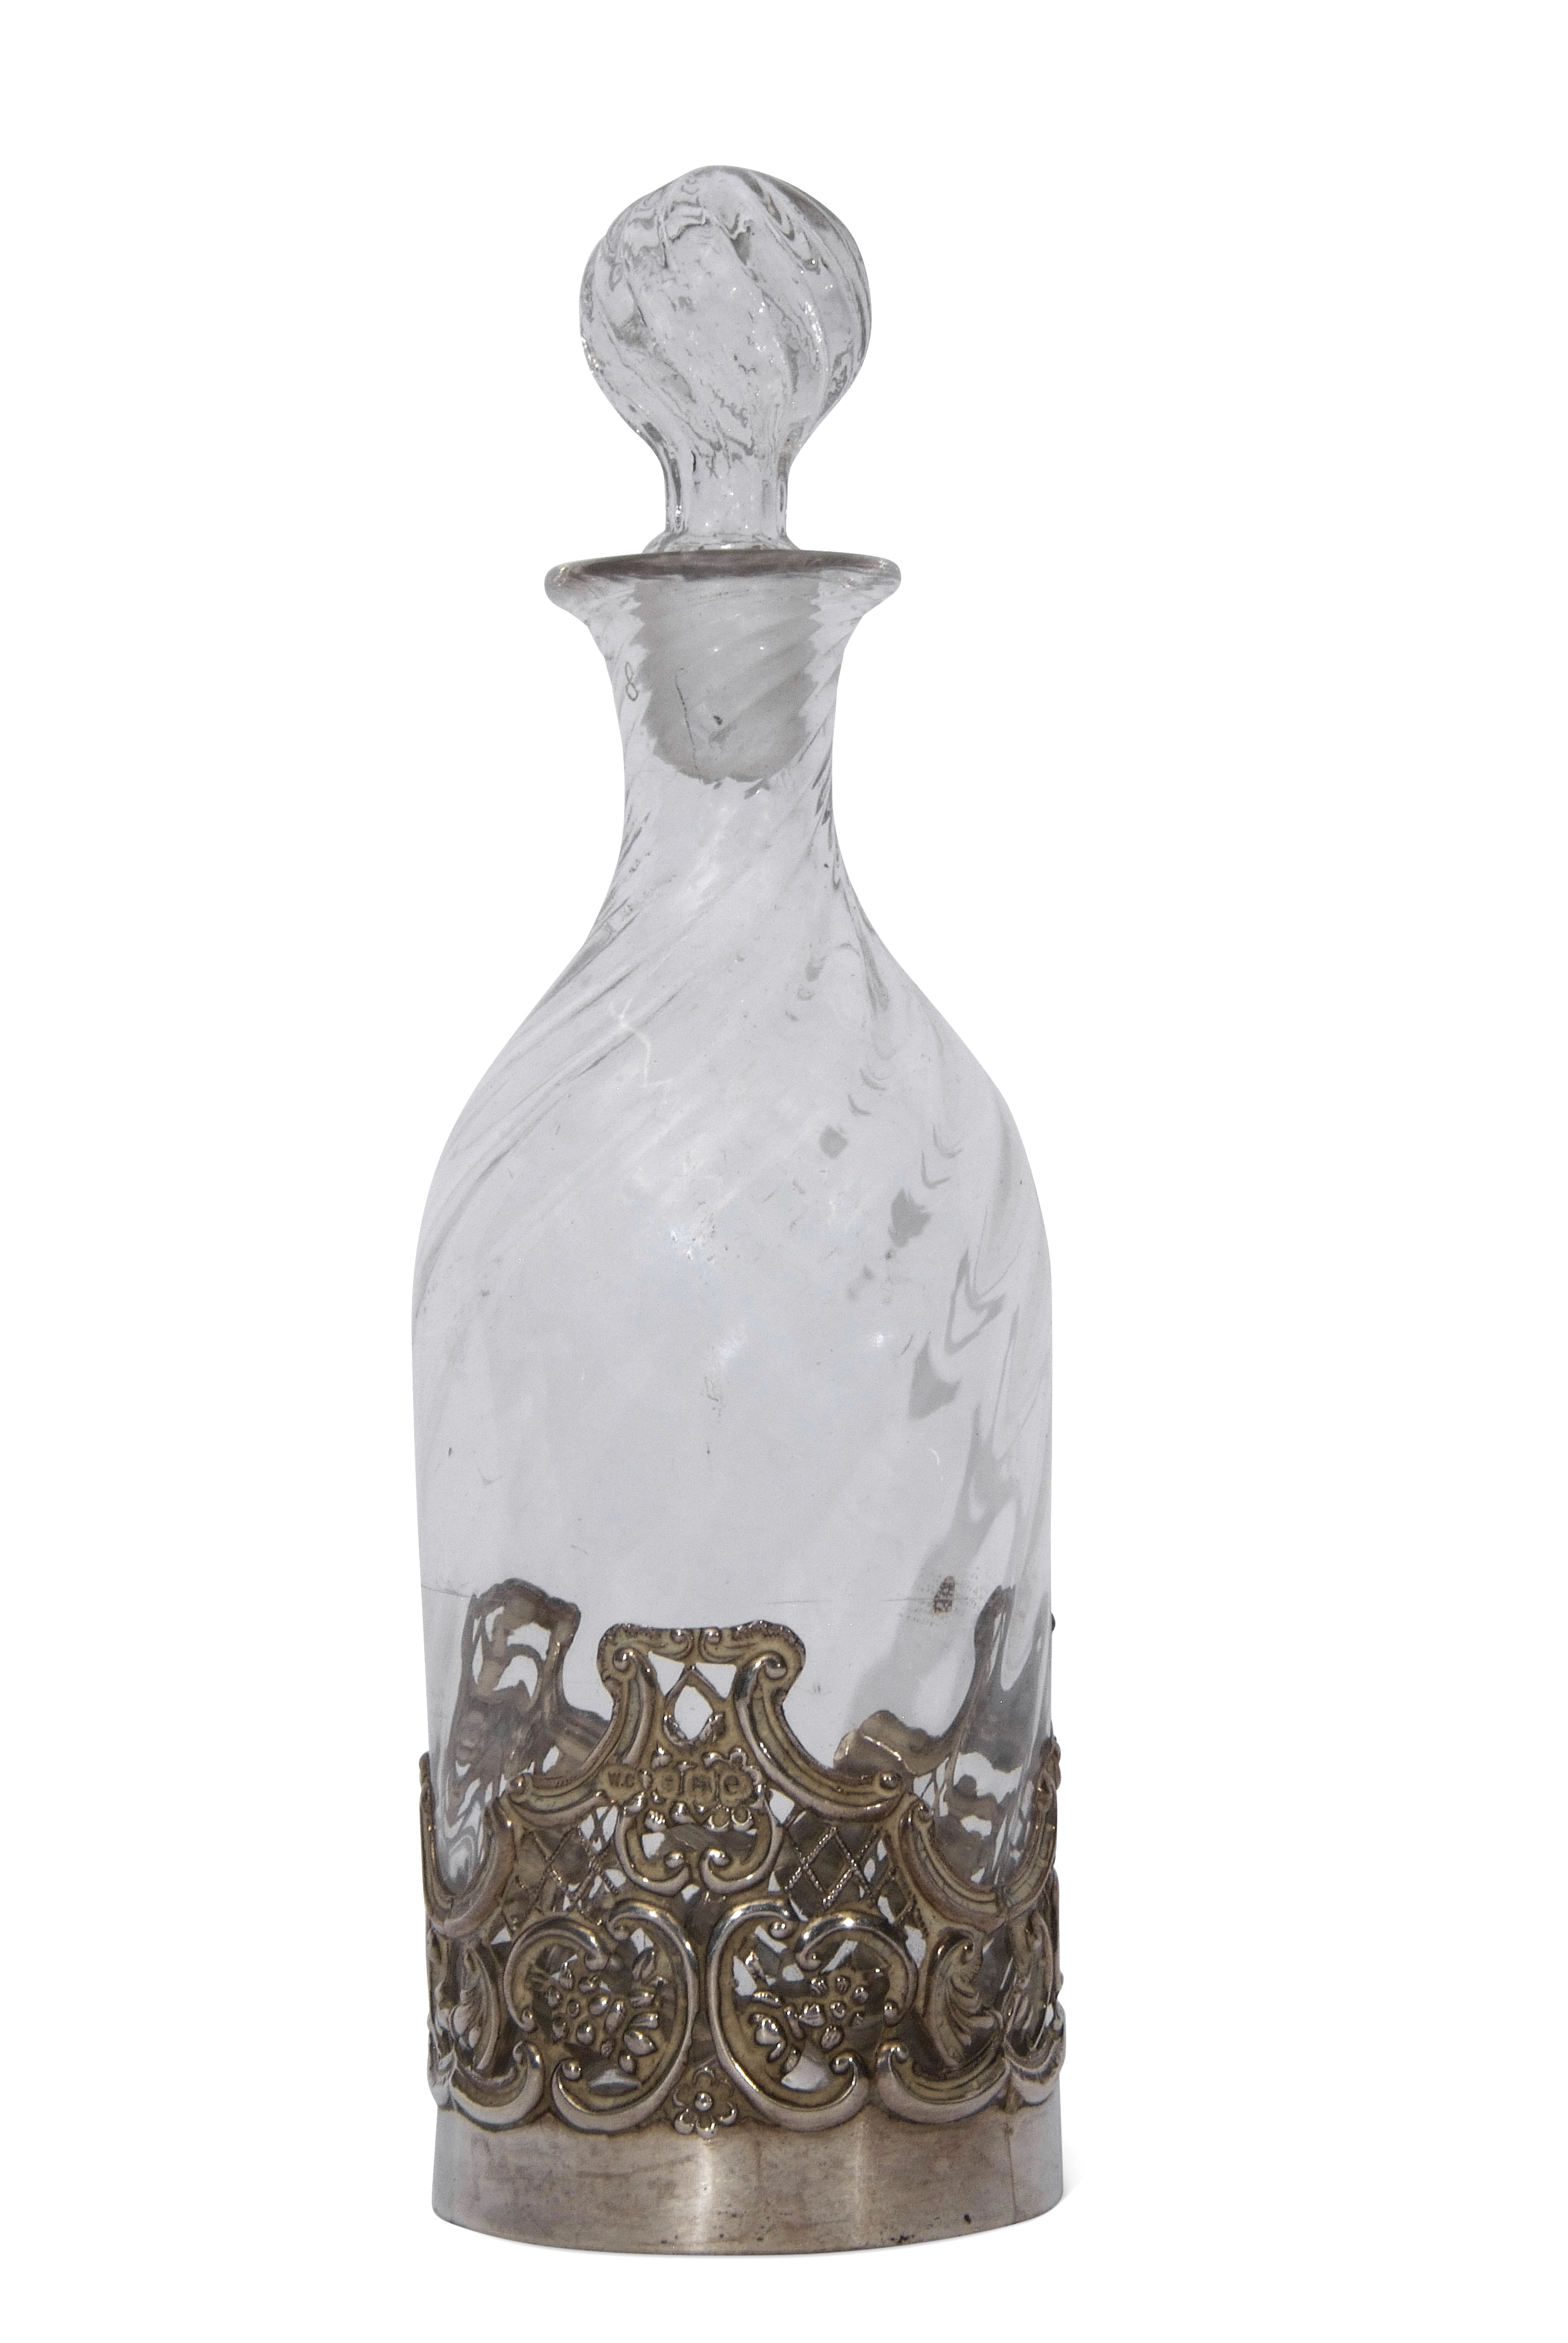 Silver mounted Victorian bottle, William Comyns, London 1900, height 20cm